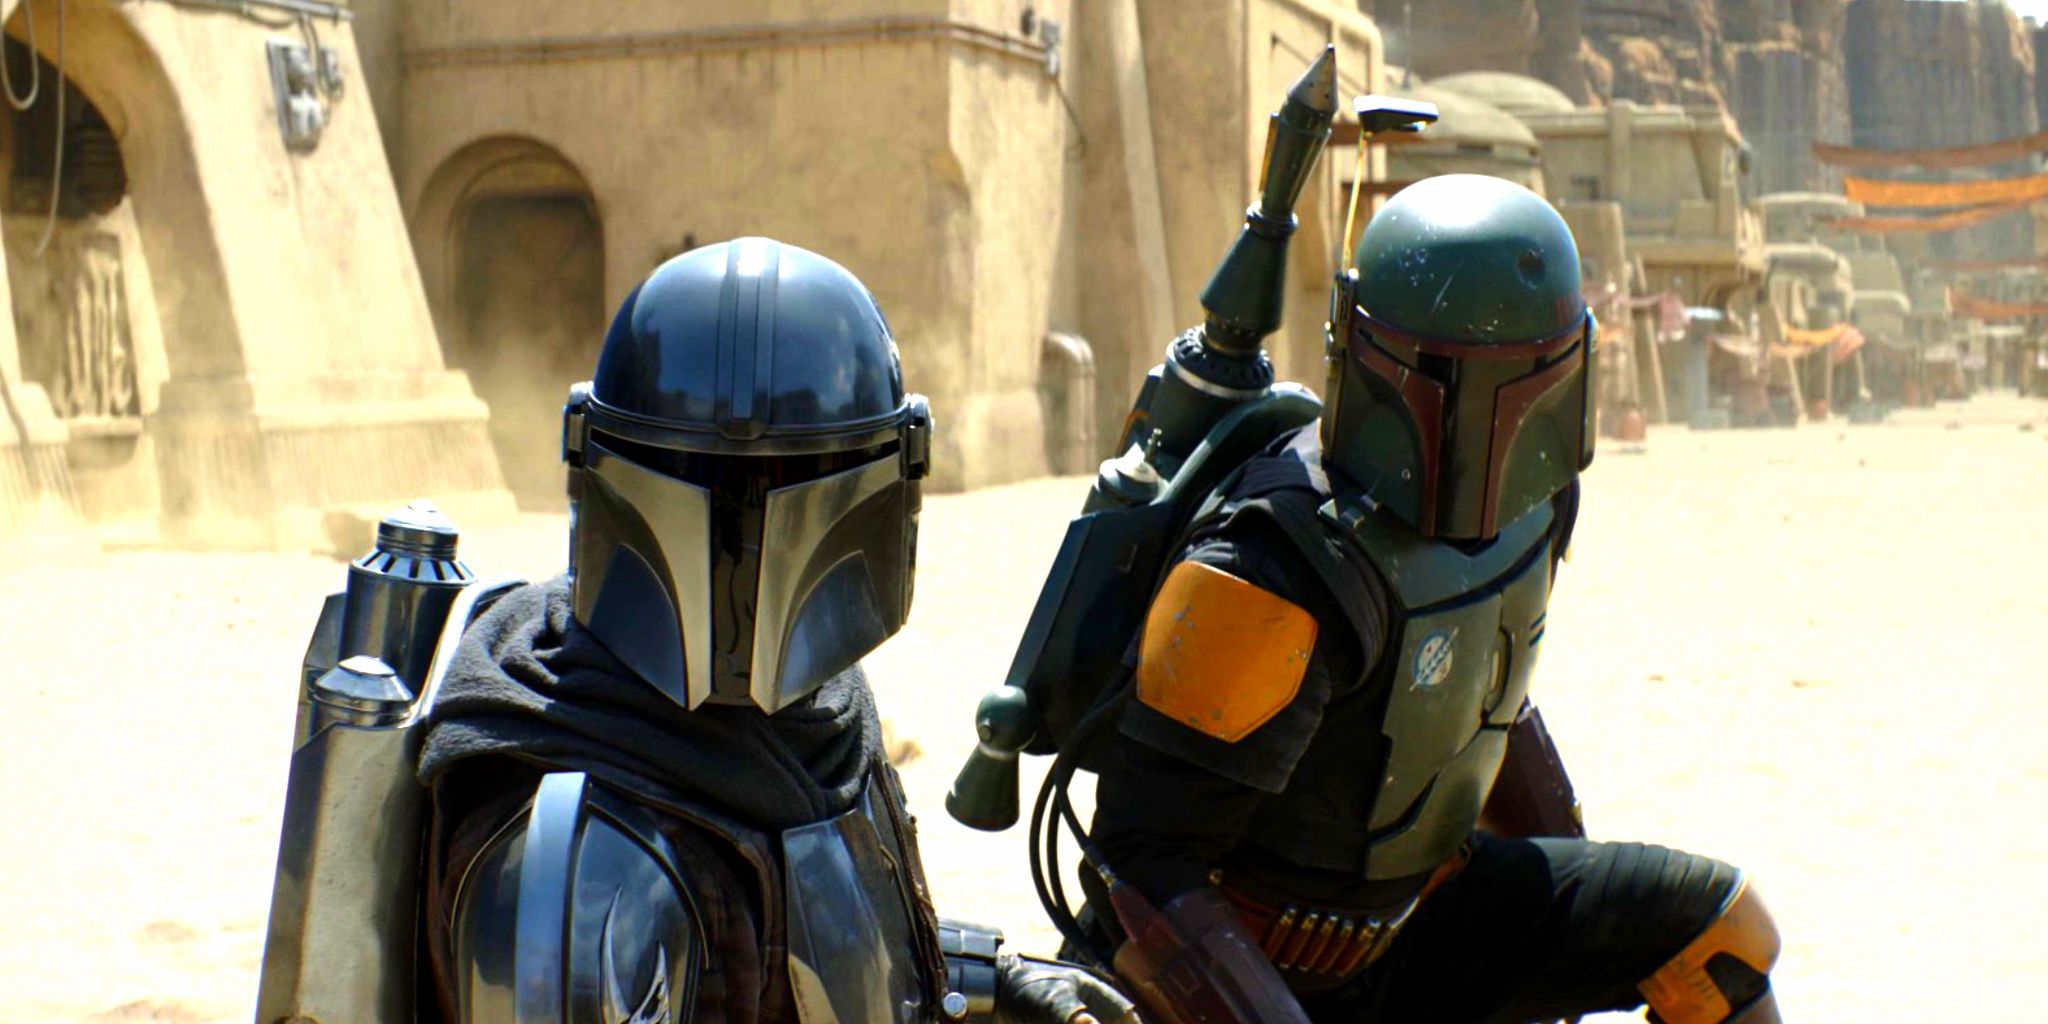 Din Djarin and Boba Fett face the Pykes in The Book of Boba Fett episode 7.